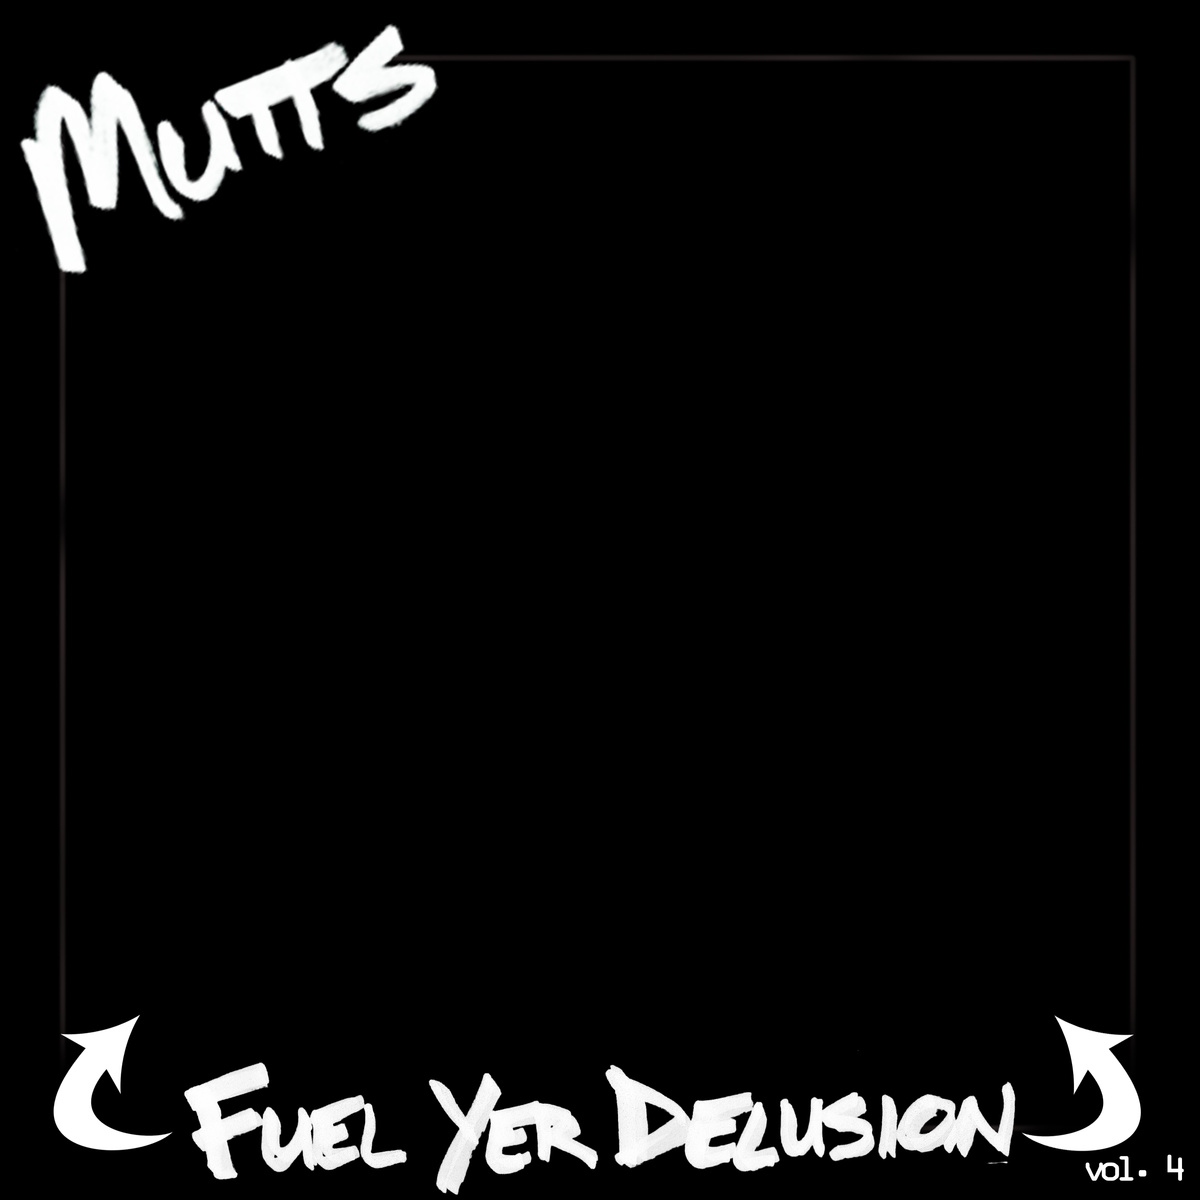 Mutts Fuel Yer Delusion vol. 4